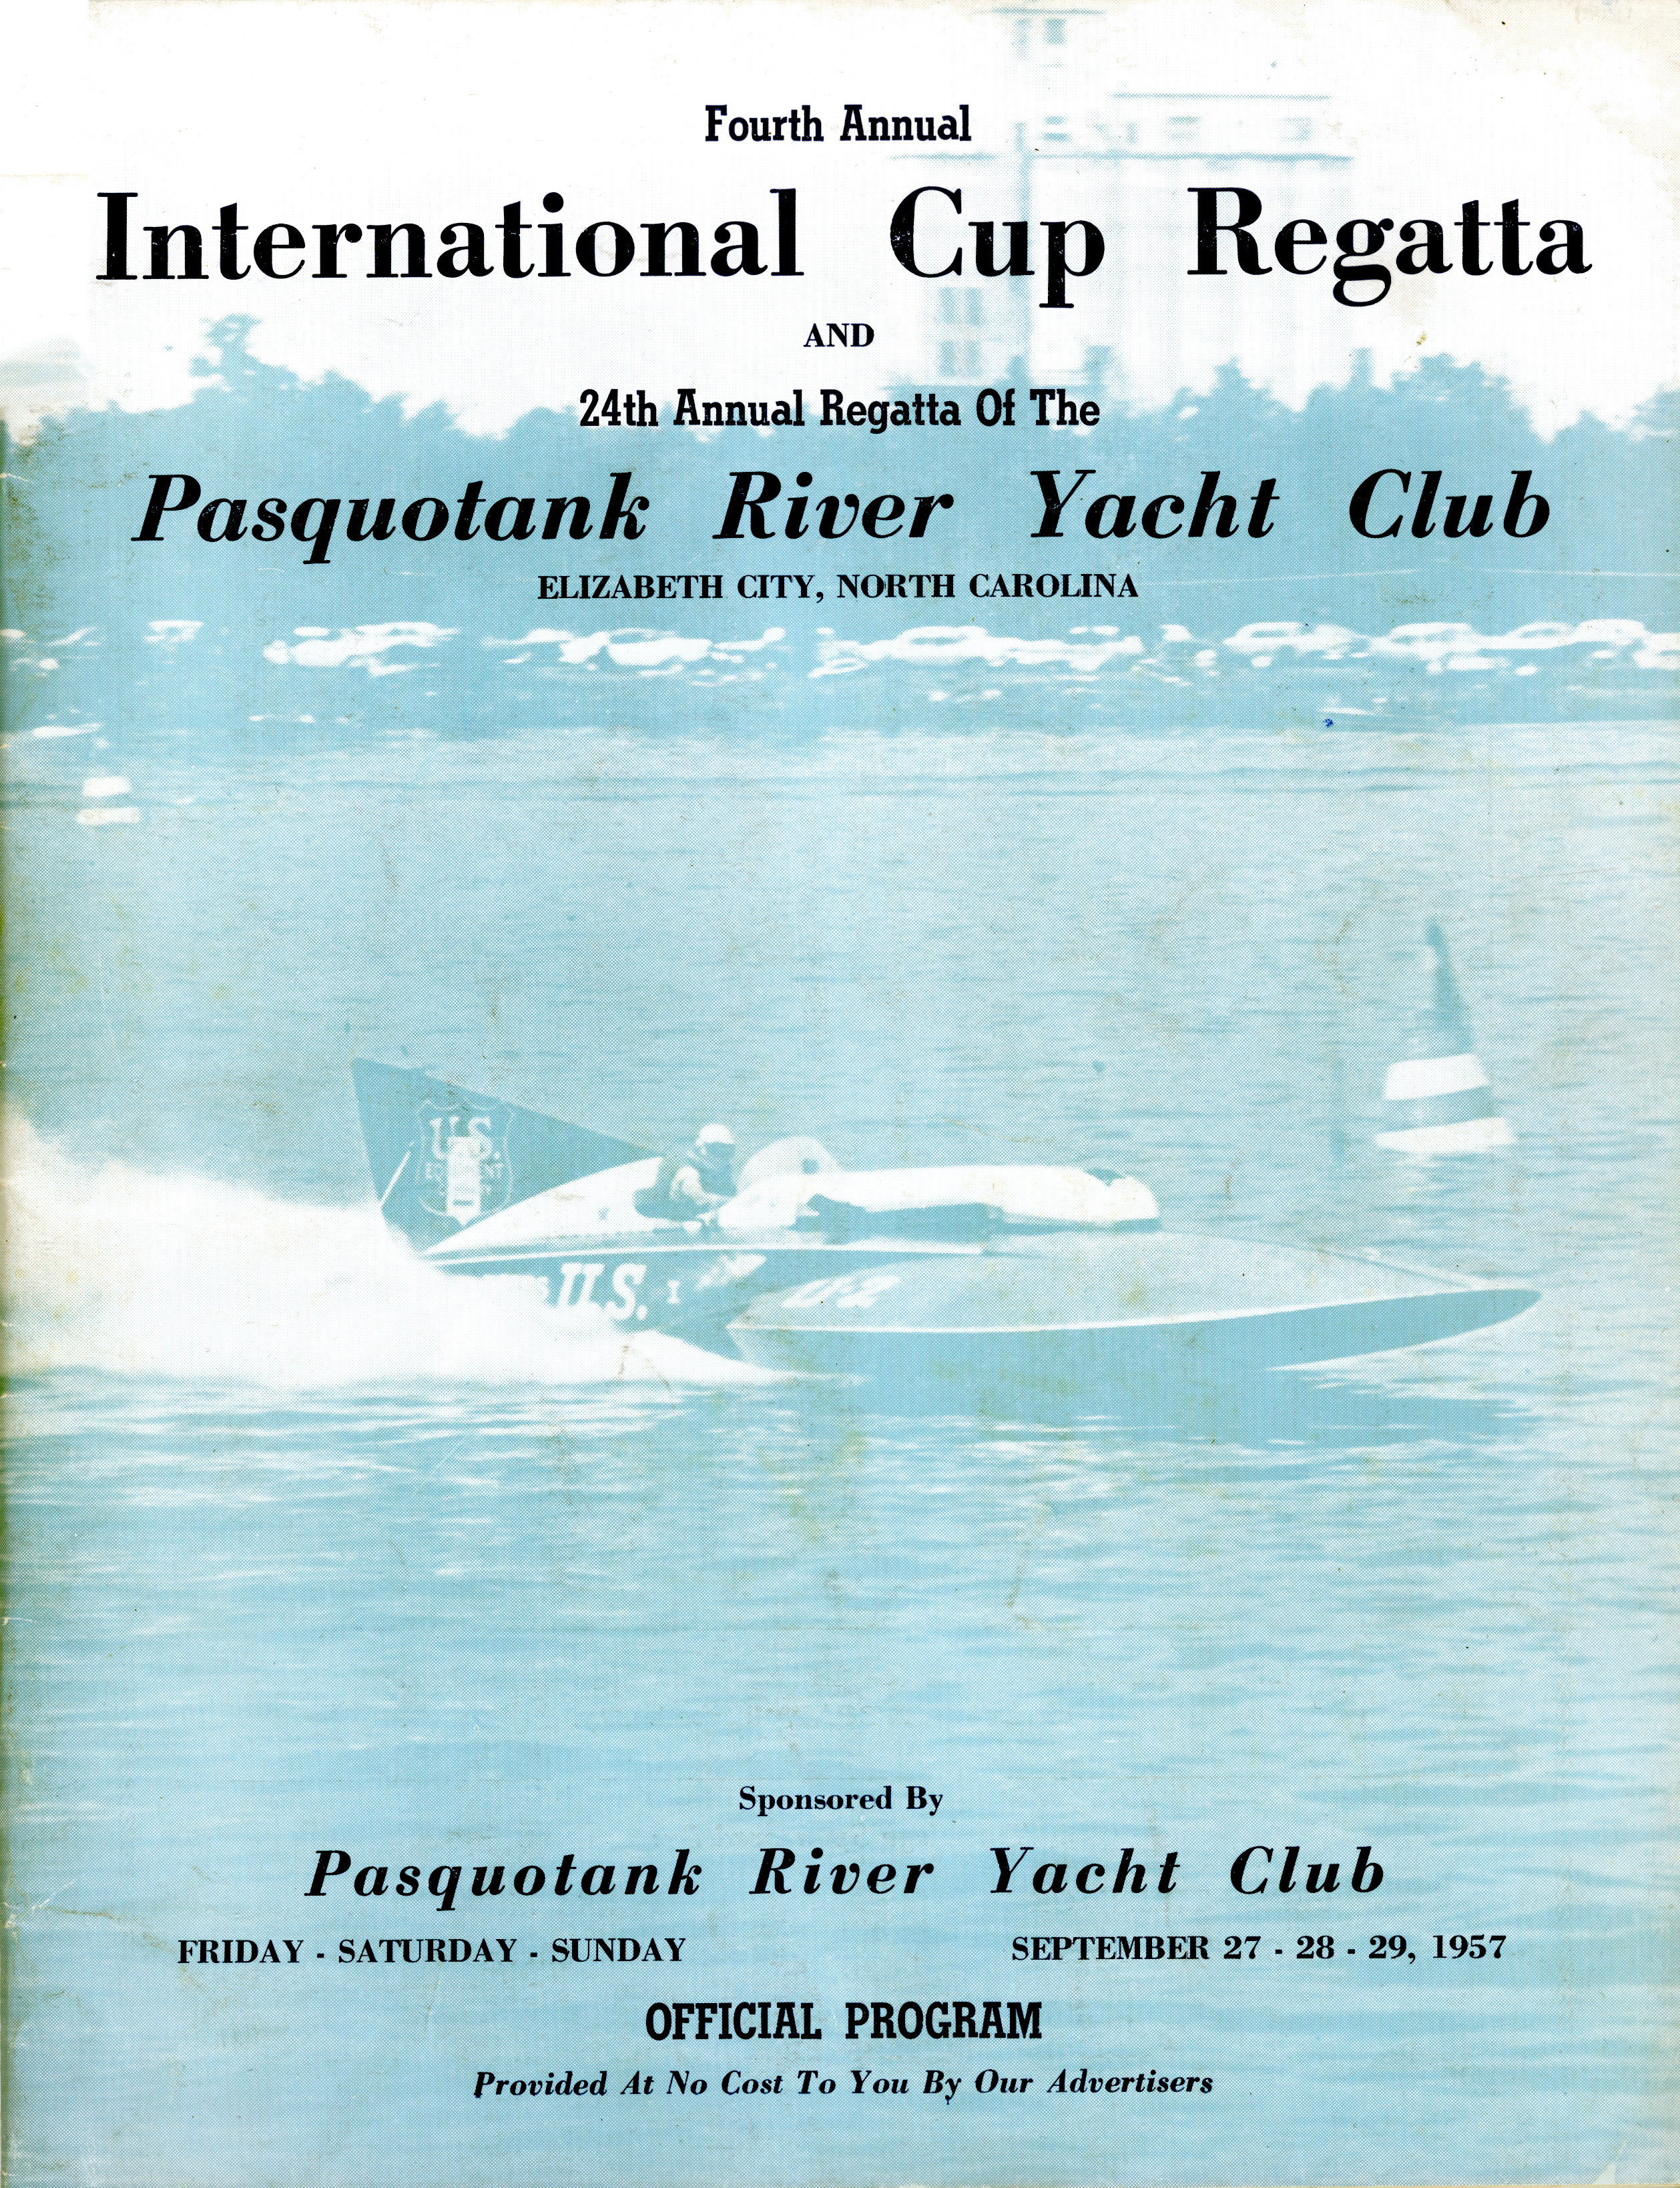 1957 International Cup Programme Cover